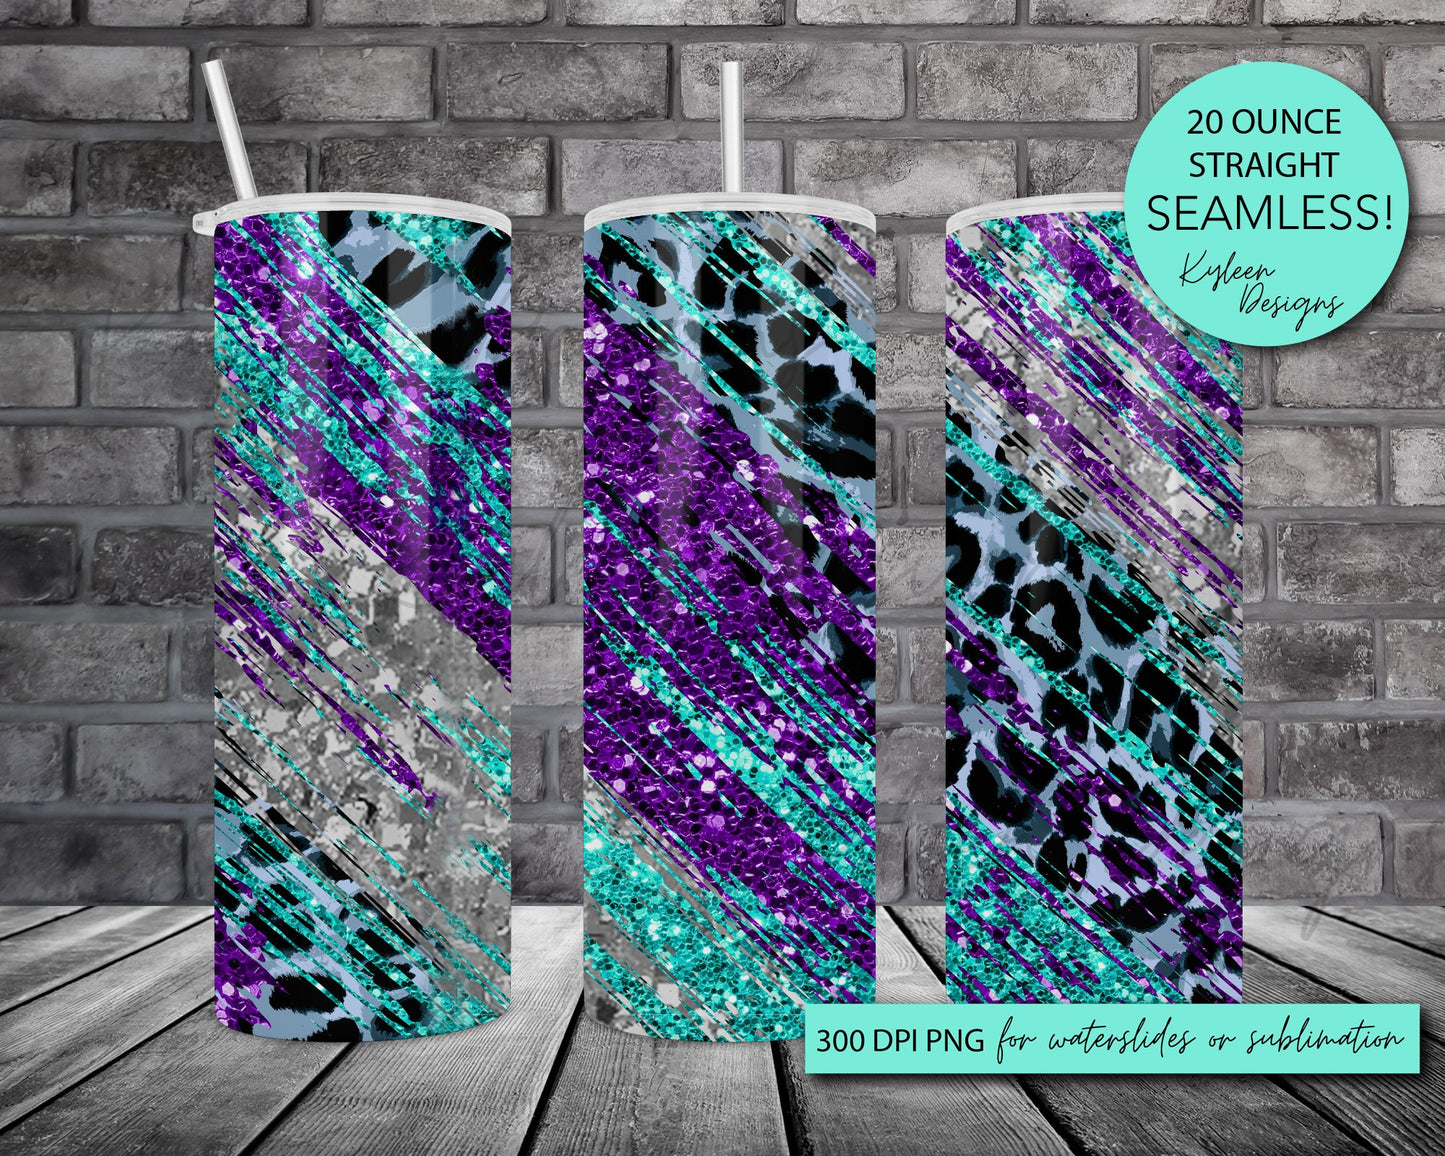 SEAMLESS 20 ounce straight teal and purple milky way wrap for sublimation, waterslide High res PNG digital file- Straight only